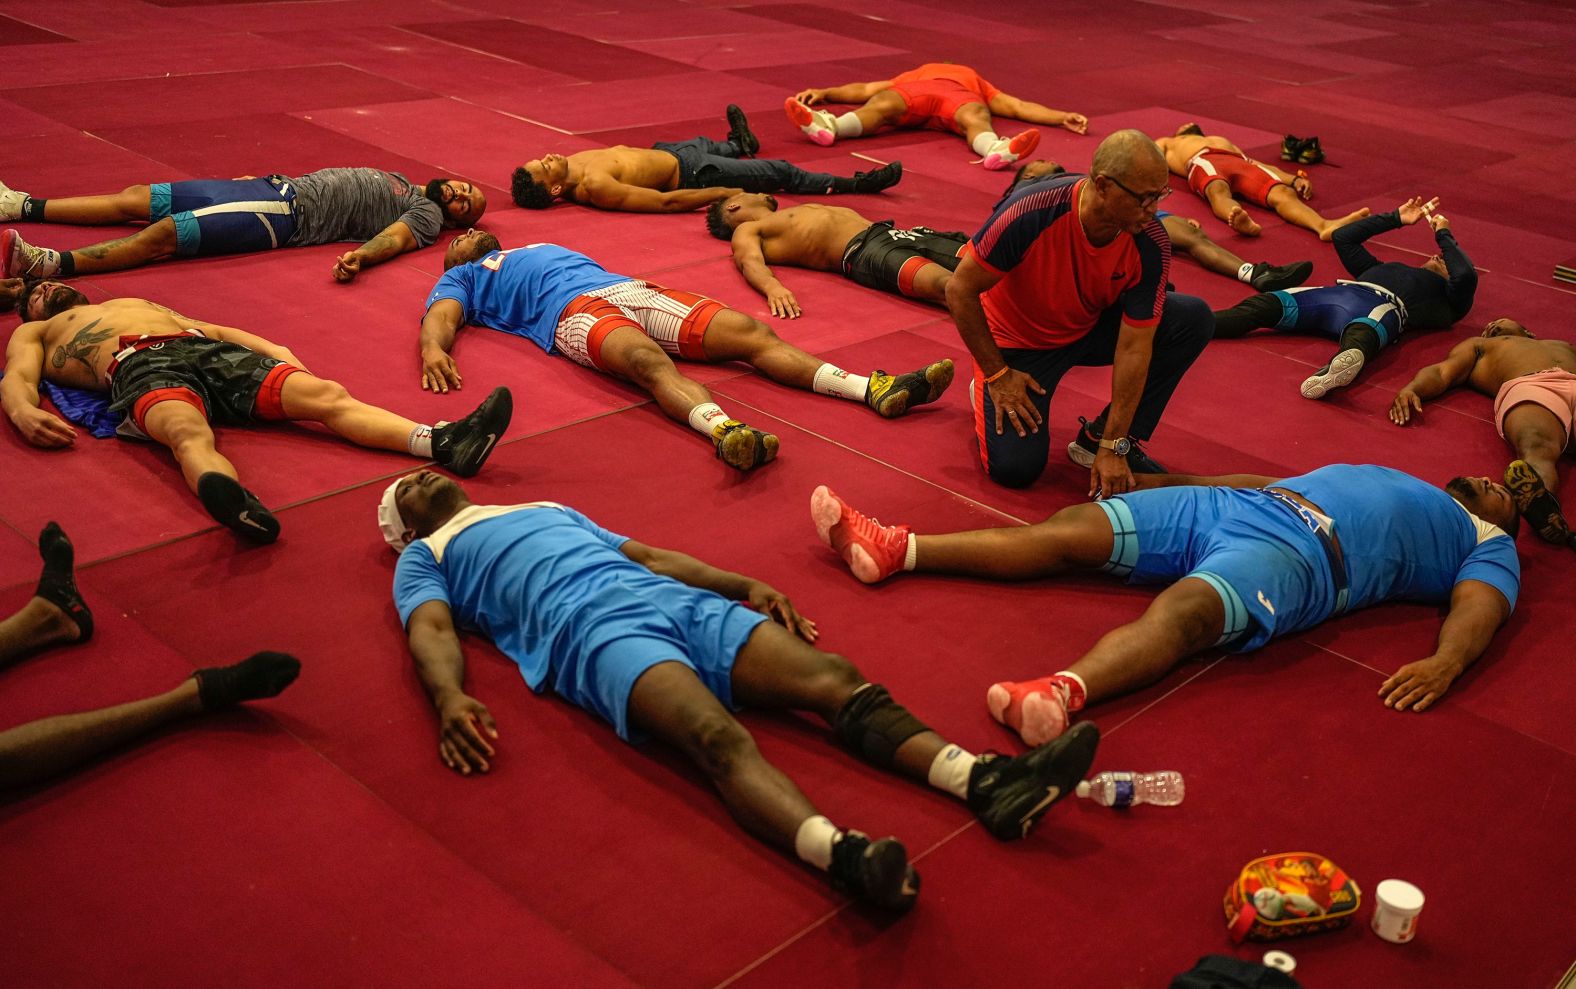 Members of Cuba's Greco-Roman wrestling team stretch out on the mat during a training session in Varadero, Cuba, on Wednesday, April 3.